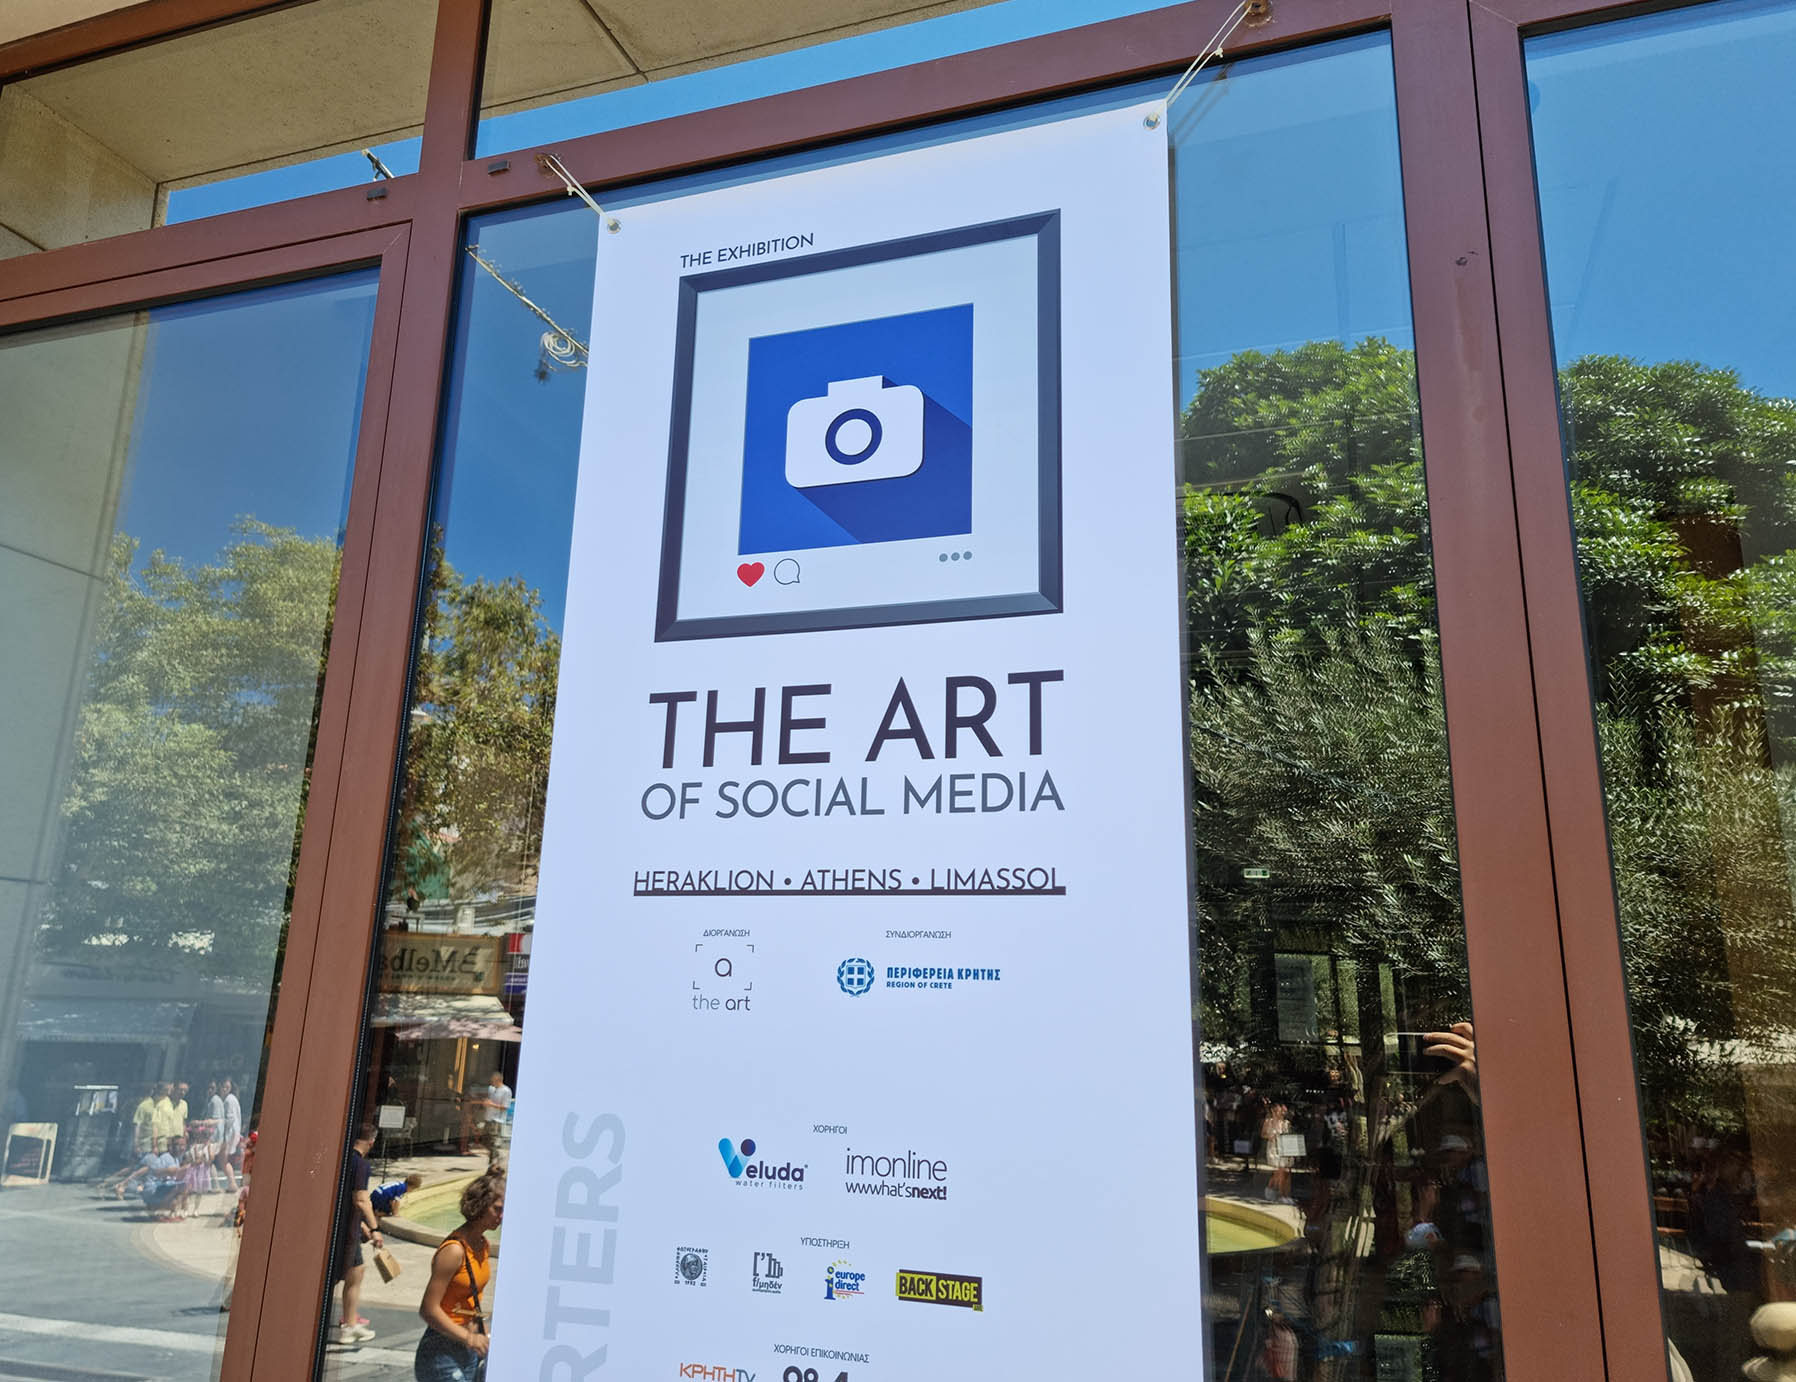 The Art of Social Media 2022 exhibition starts on Monday!